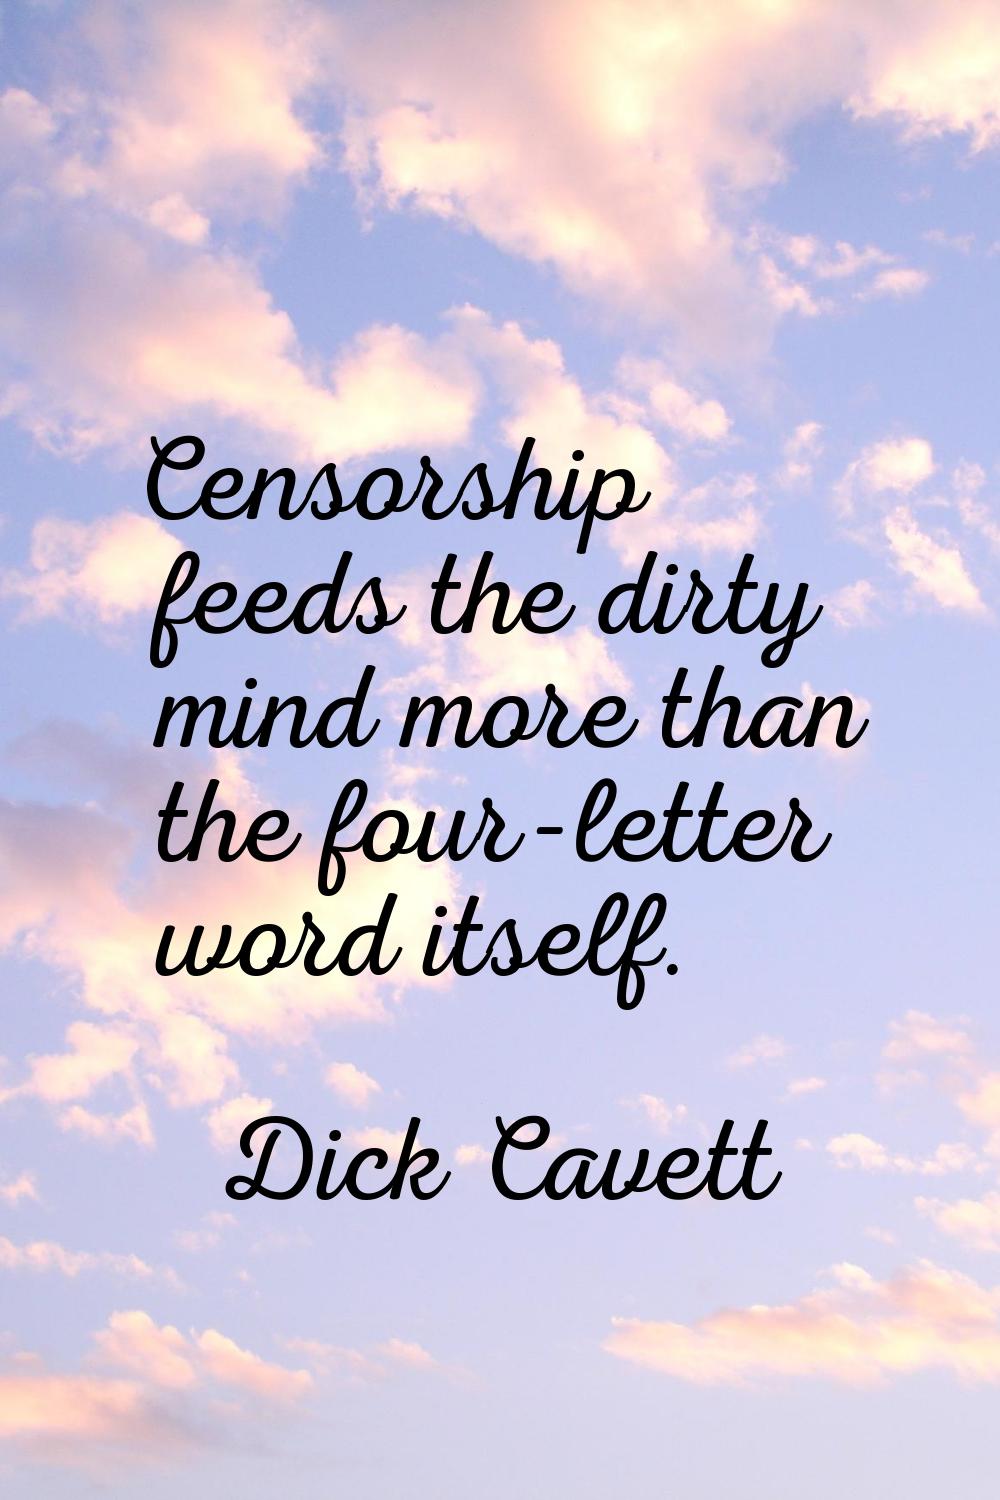 Censorship feeds the dirty mind more than the four-letter word itself.